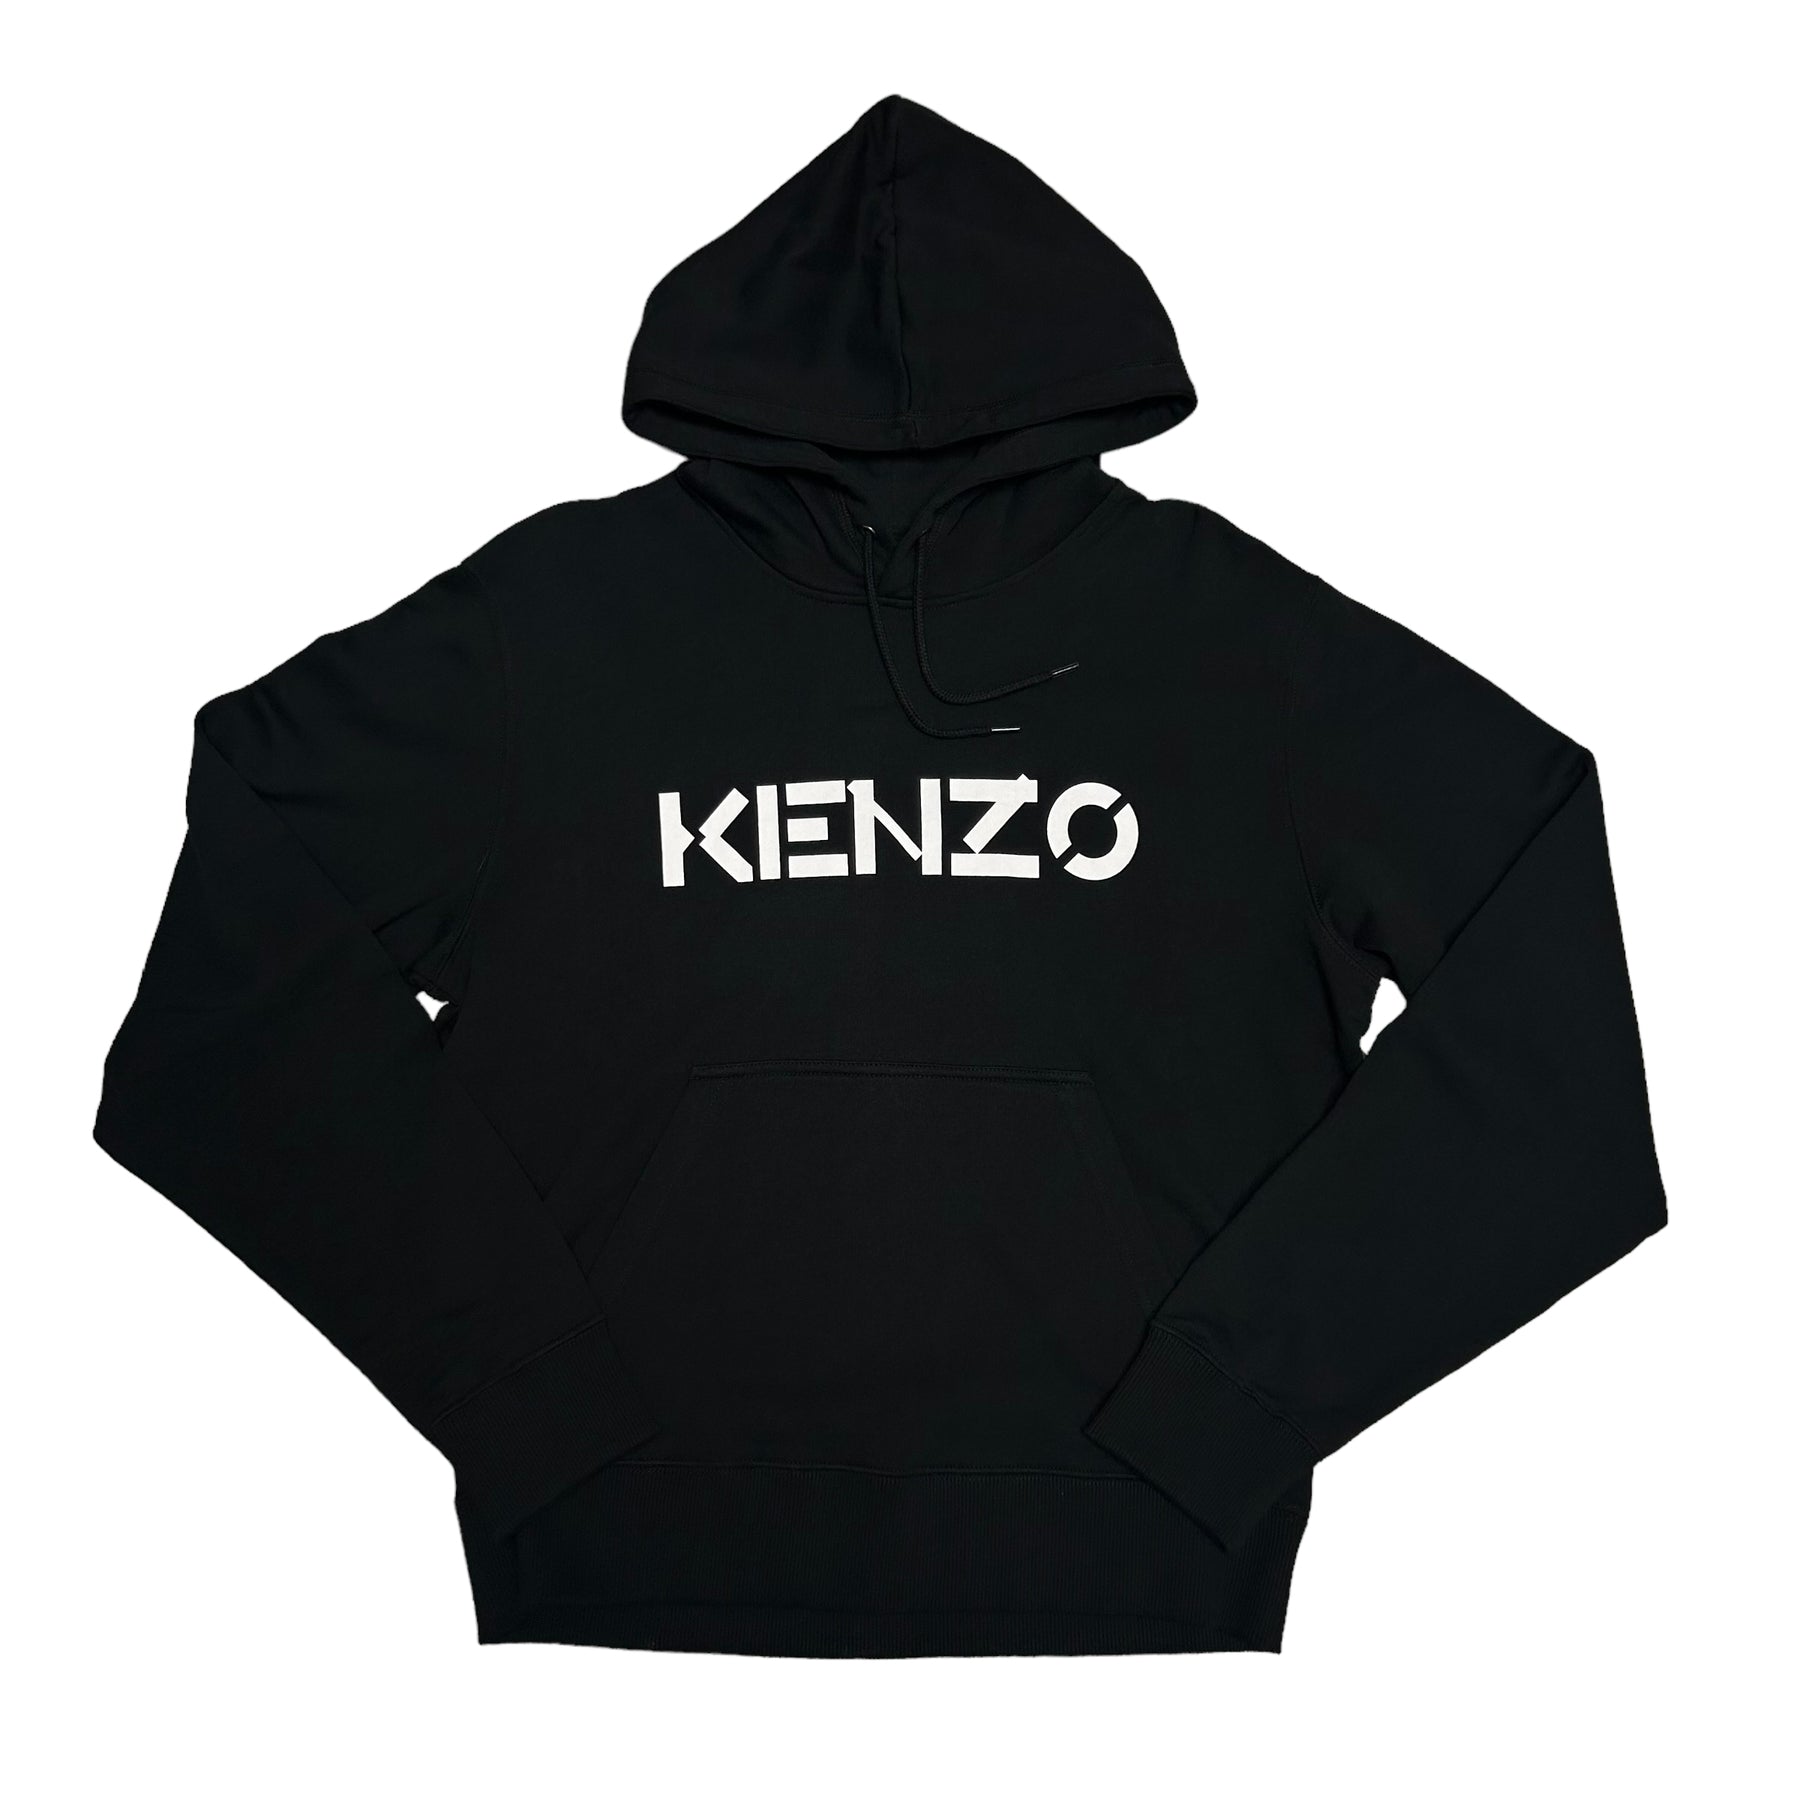 KENZO LOGO in stunning Black and White KENZO is now available at  Streetwearvilla! Check us out now. #streetwear #streetfashion … | ? logo,  Kenzo wallpaper, Kenzo